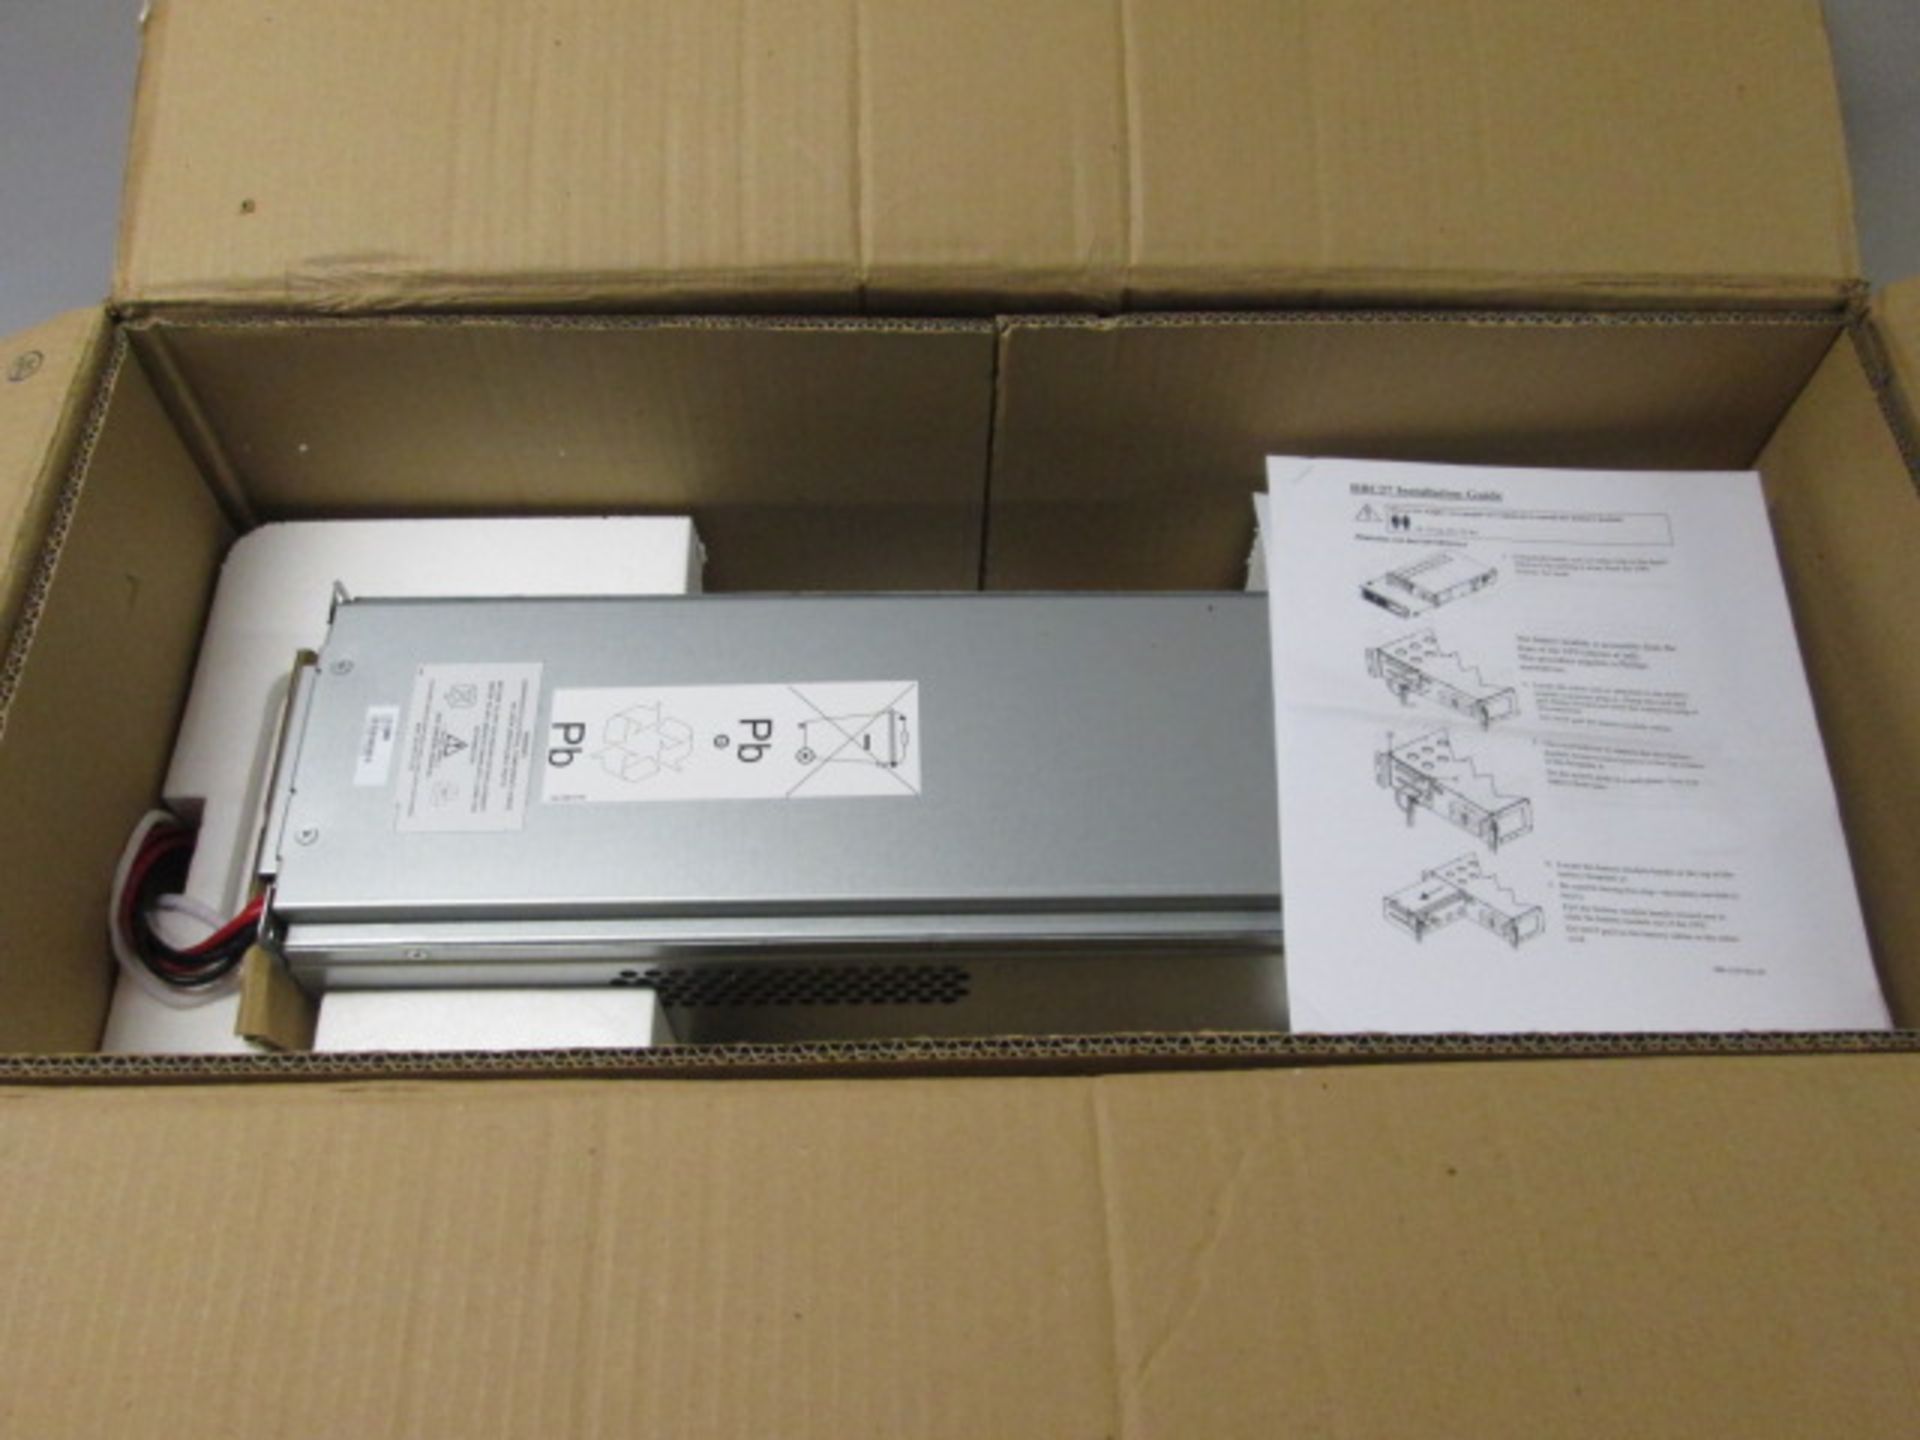 APC RBC27 Replacement Battery Module. Boxed as New with Installation Guide.